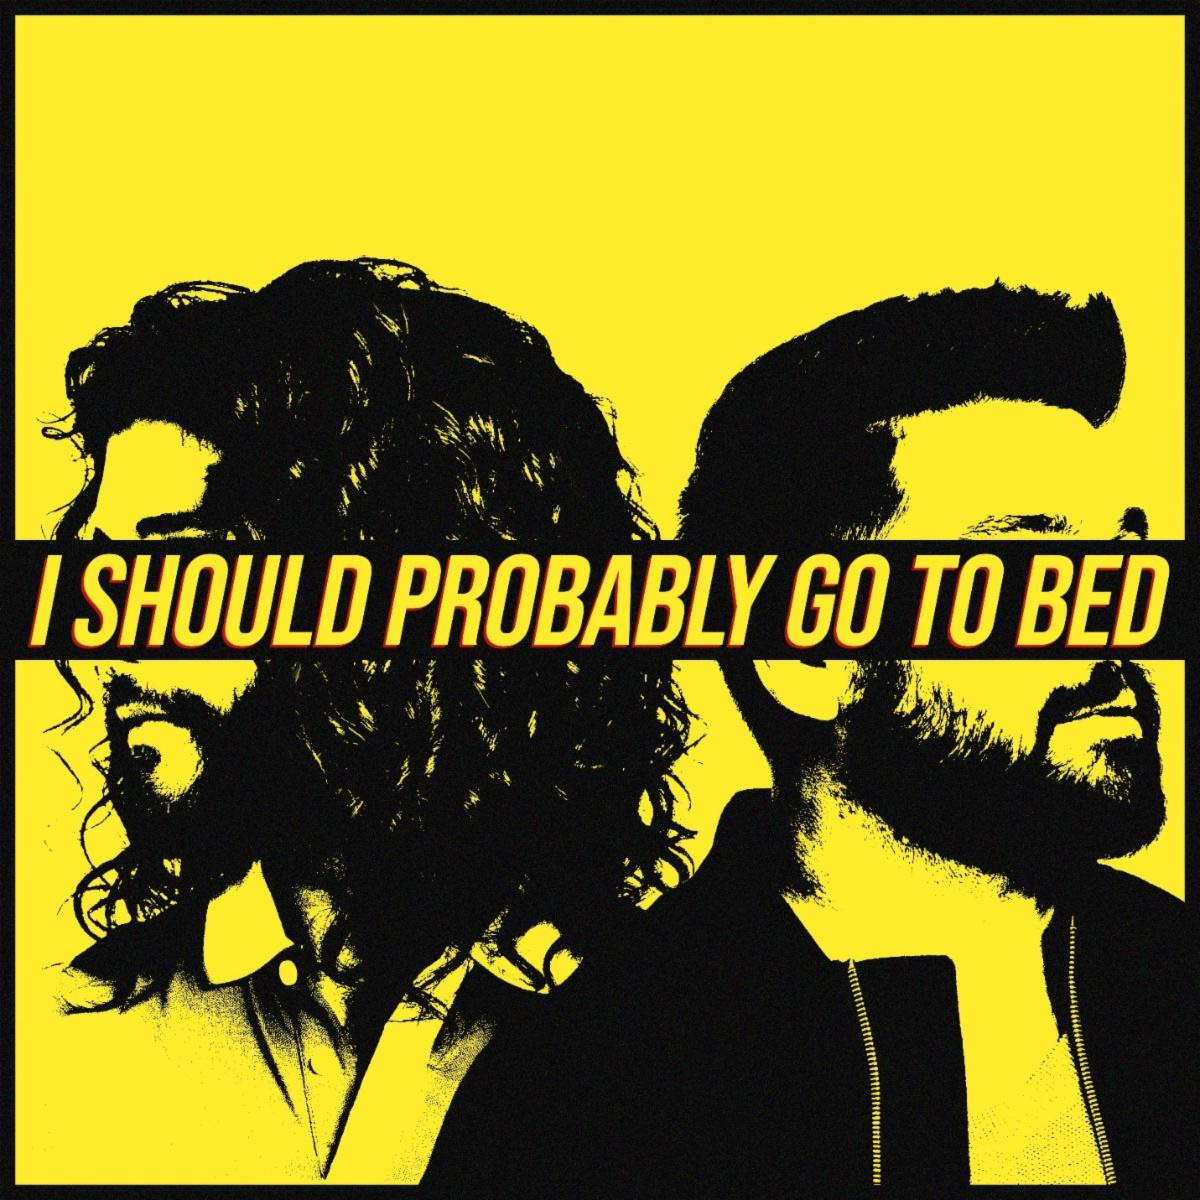 Dan + Shay Hit No. 1 With Single “I Should Probably Go To Bed”